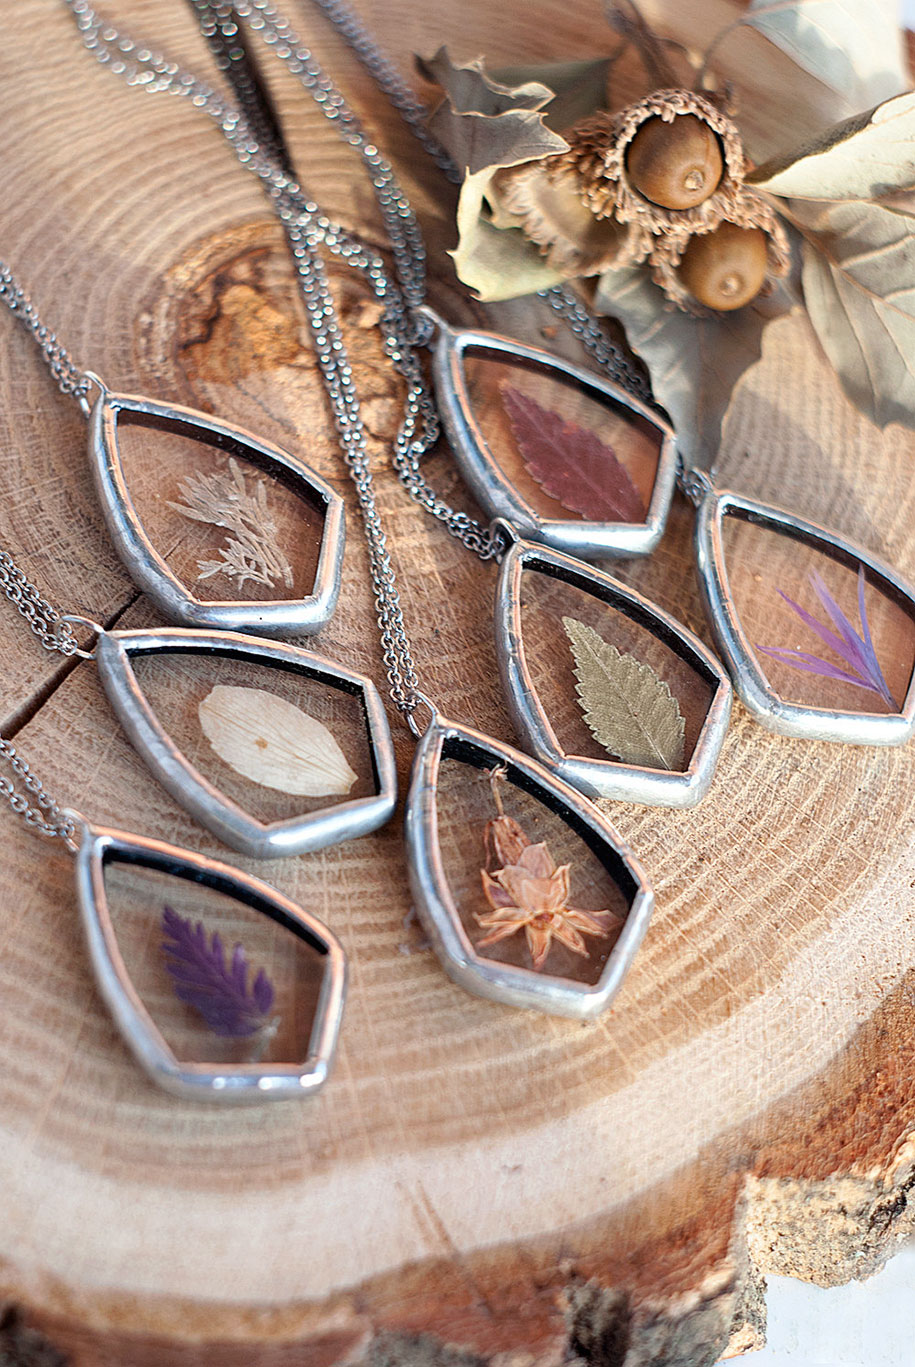 Artist Captures Nature's Beauty With Pressed Glass Jewelry | DeMilked